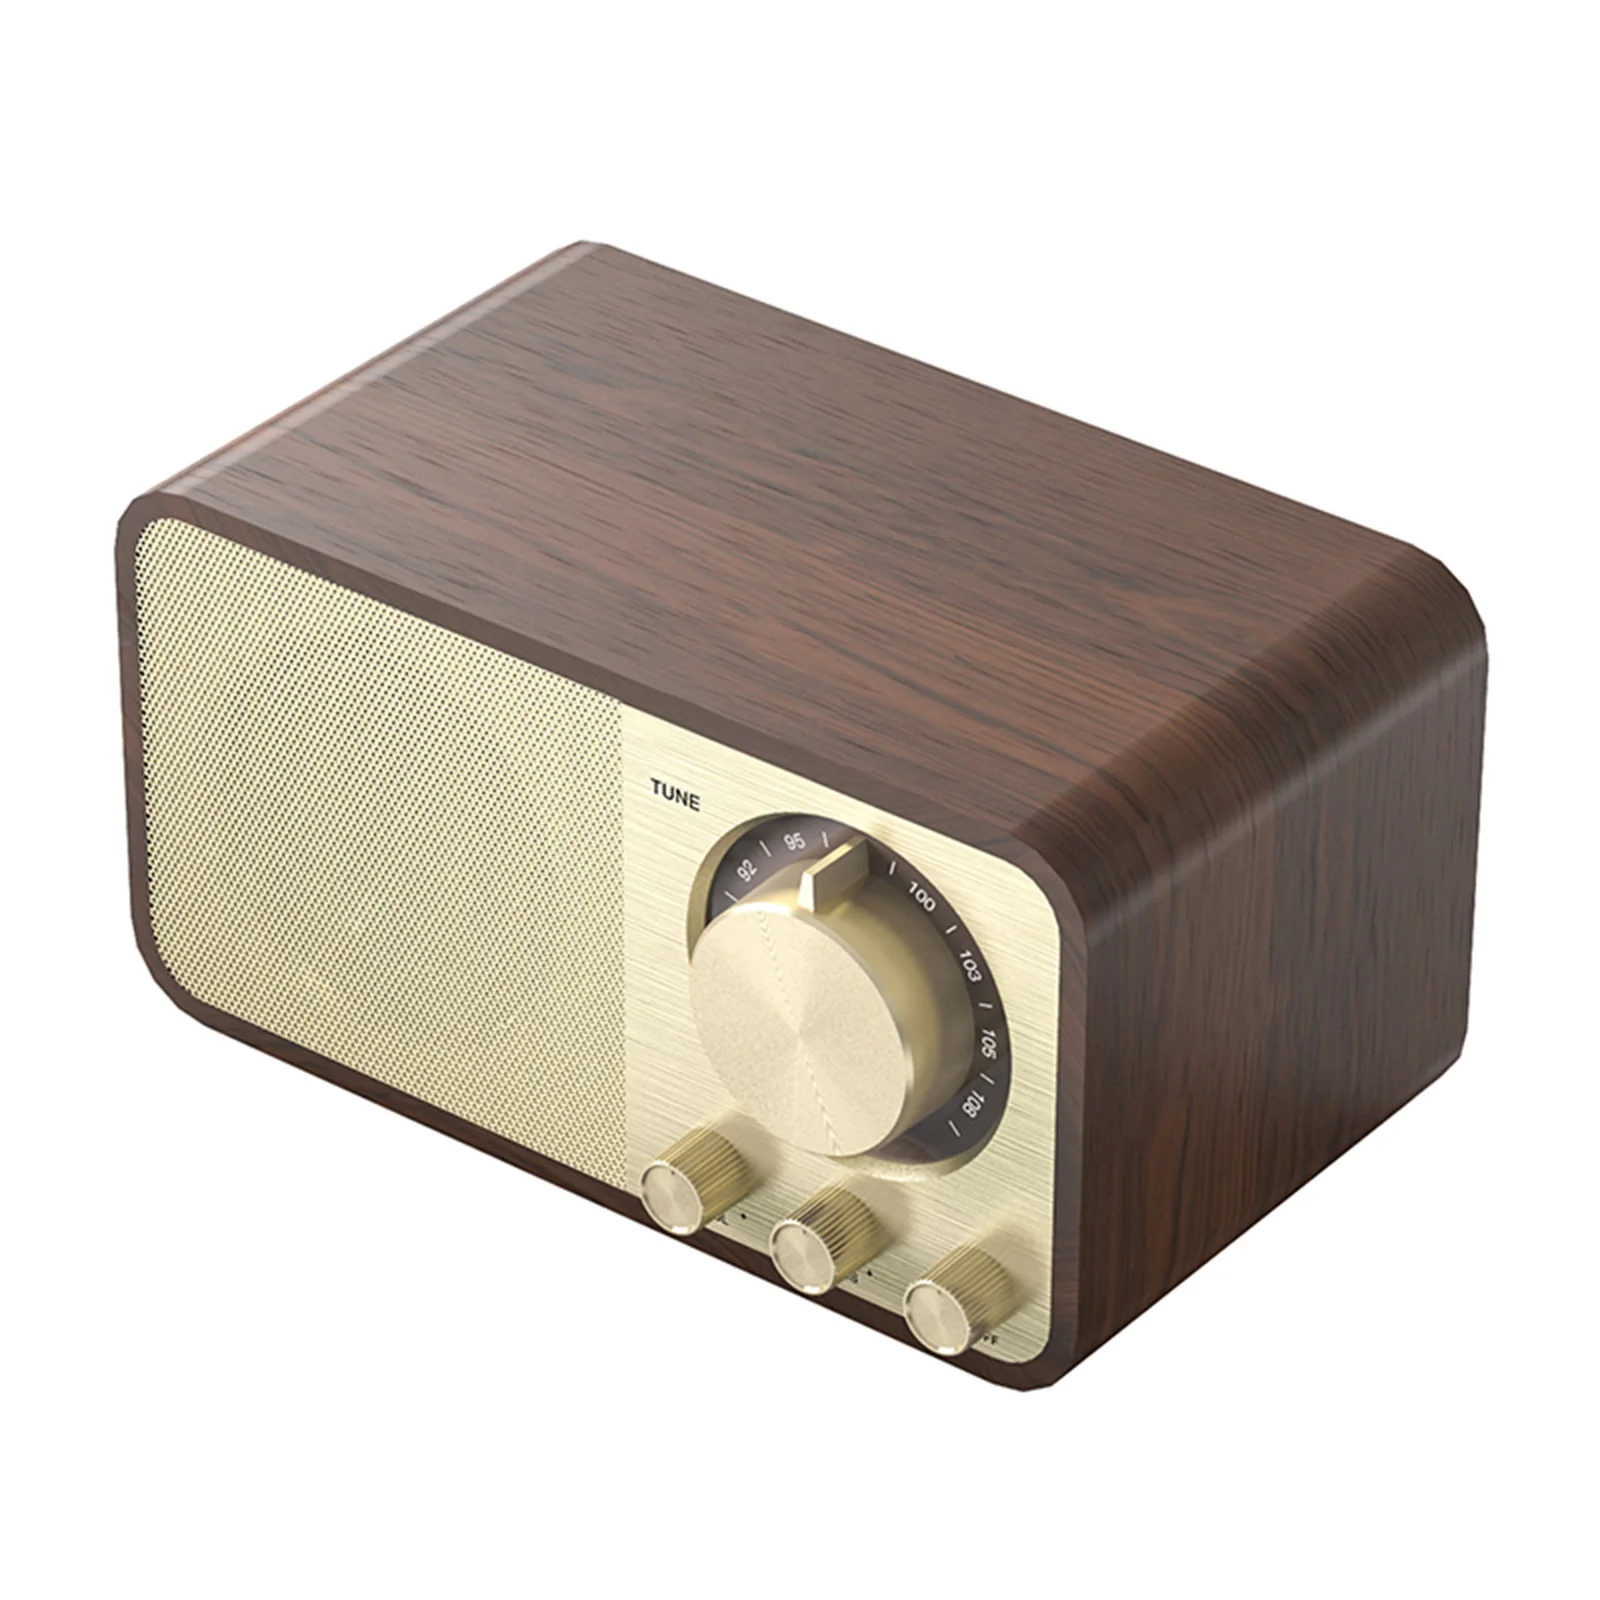 

JY-66 Wooden Color Wireless BT5.0 Speaker Retro Classic Soundbox Super Bass Subwoofer Support FM TF U Disk AUX IN Music Playback